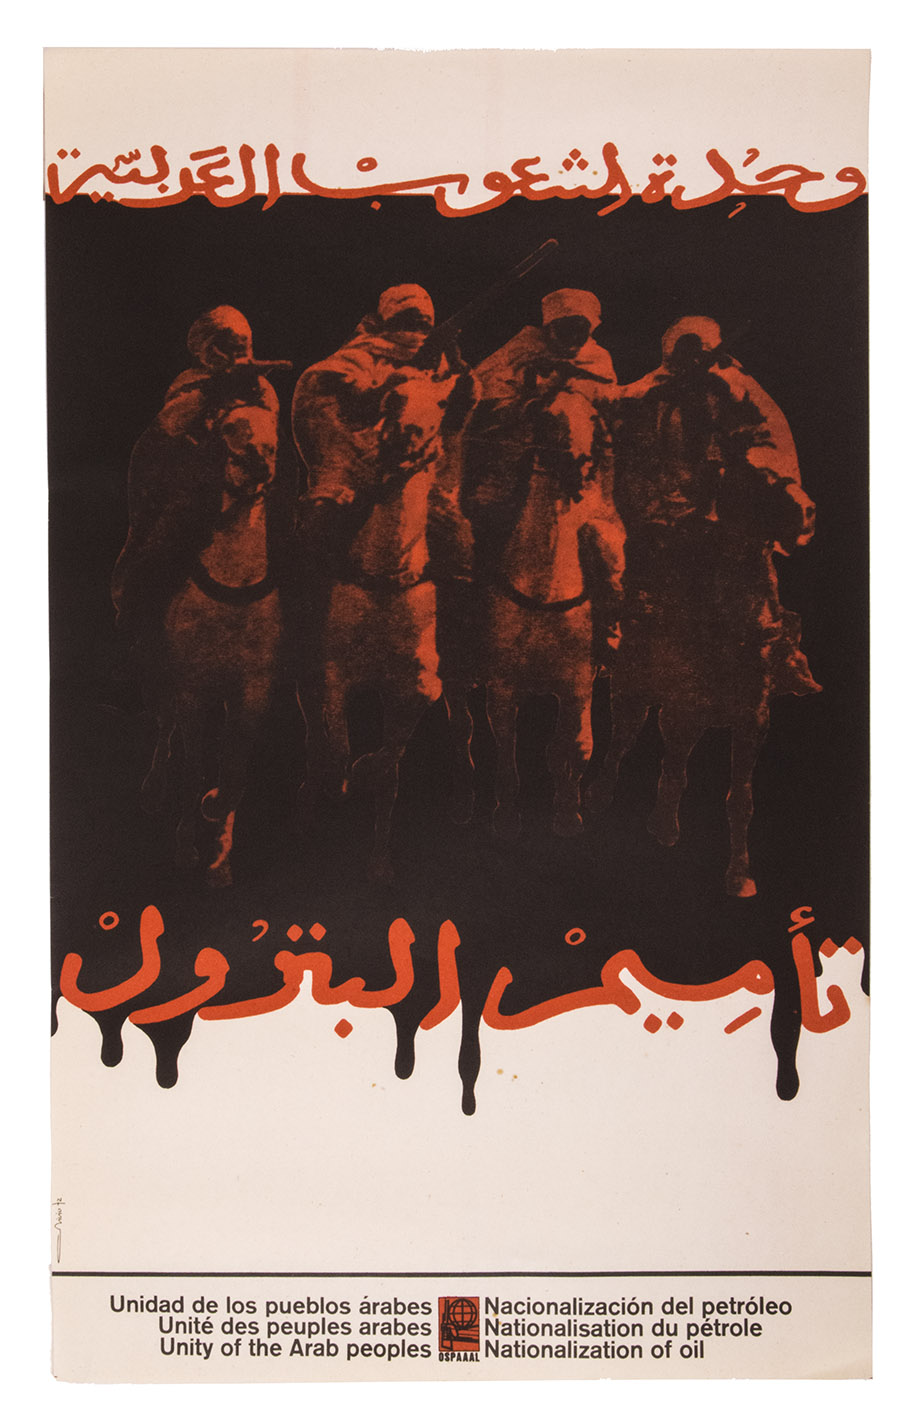 [OSPAAAL]. MARTINEZ, Olivio. - Unity of the Arab peoples - Nationalization of oil.[Cuba, 1972]. Poster (ca. 52.5 x 32.5 cm) printed in black and red, with an image of four armed Arabian horsemen, with Arabic text above and below, and with the title in Spanish, French and English at the foot of the poster, together with the logo of the OSPAAAL.